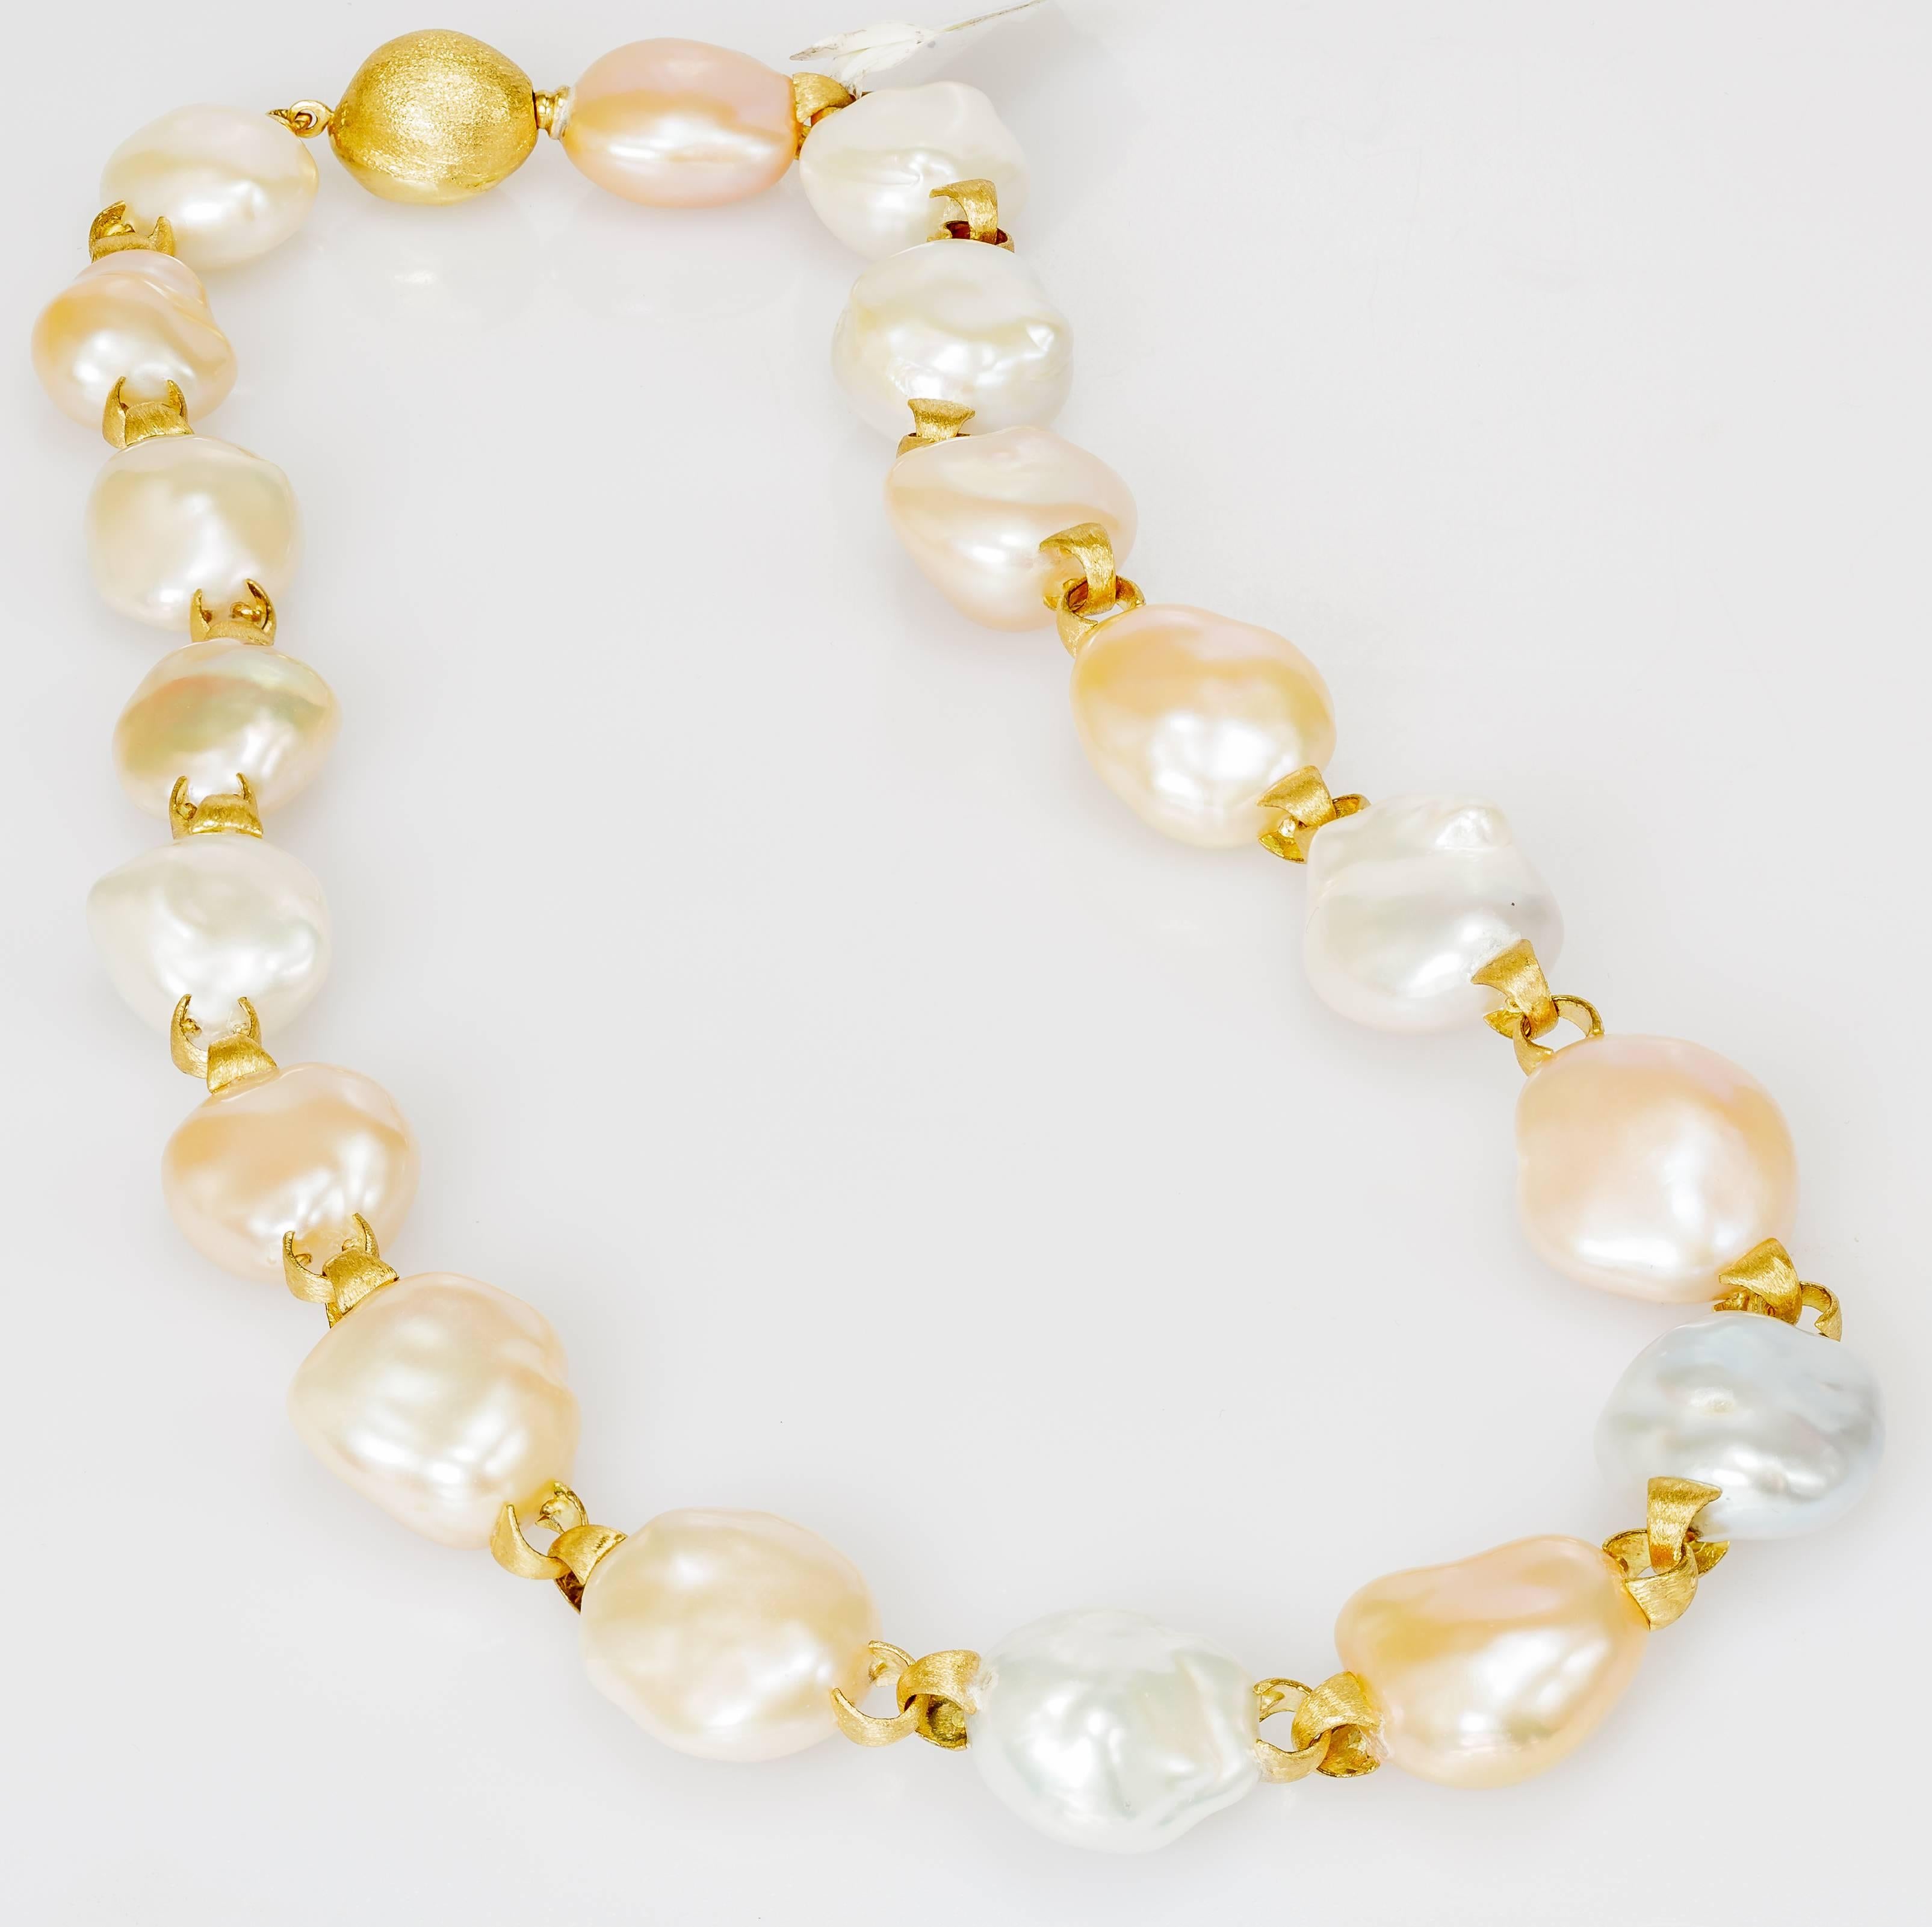 This Yvel necklace features multicolored baroque pearls linked by 18k yellow gold.  The necklace measures 17 inches long.